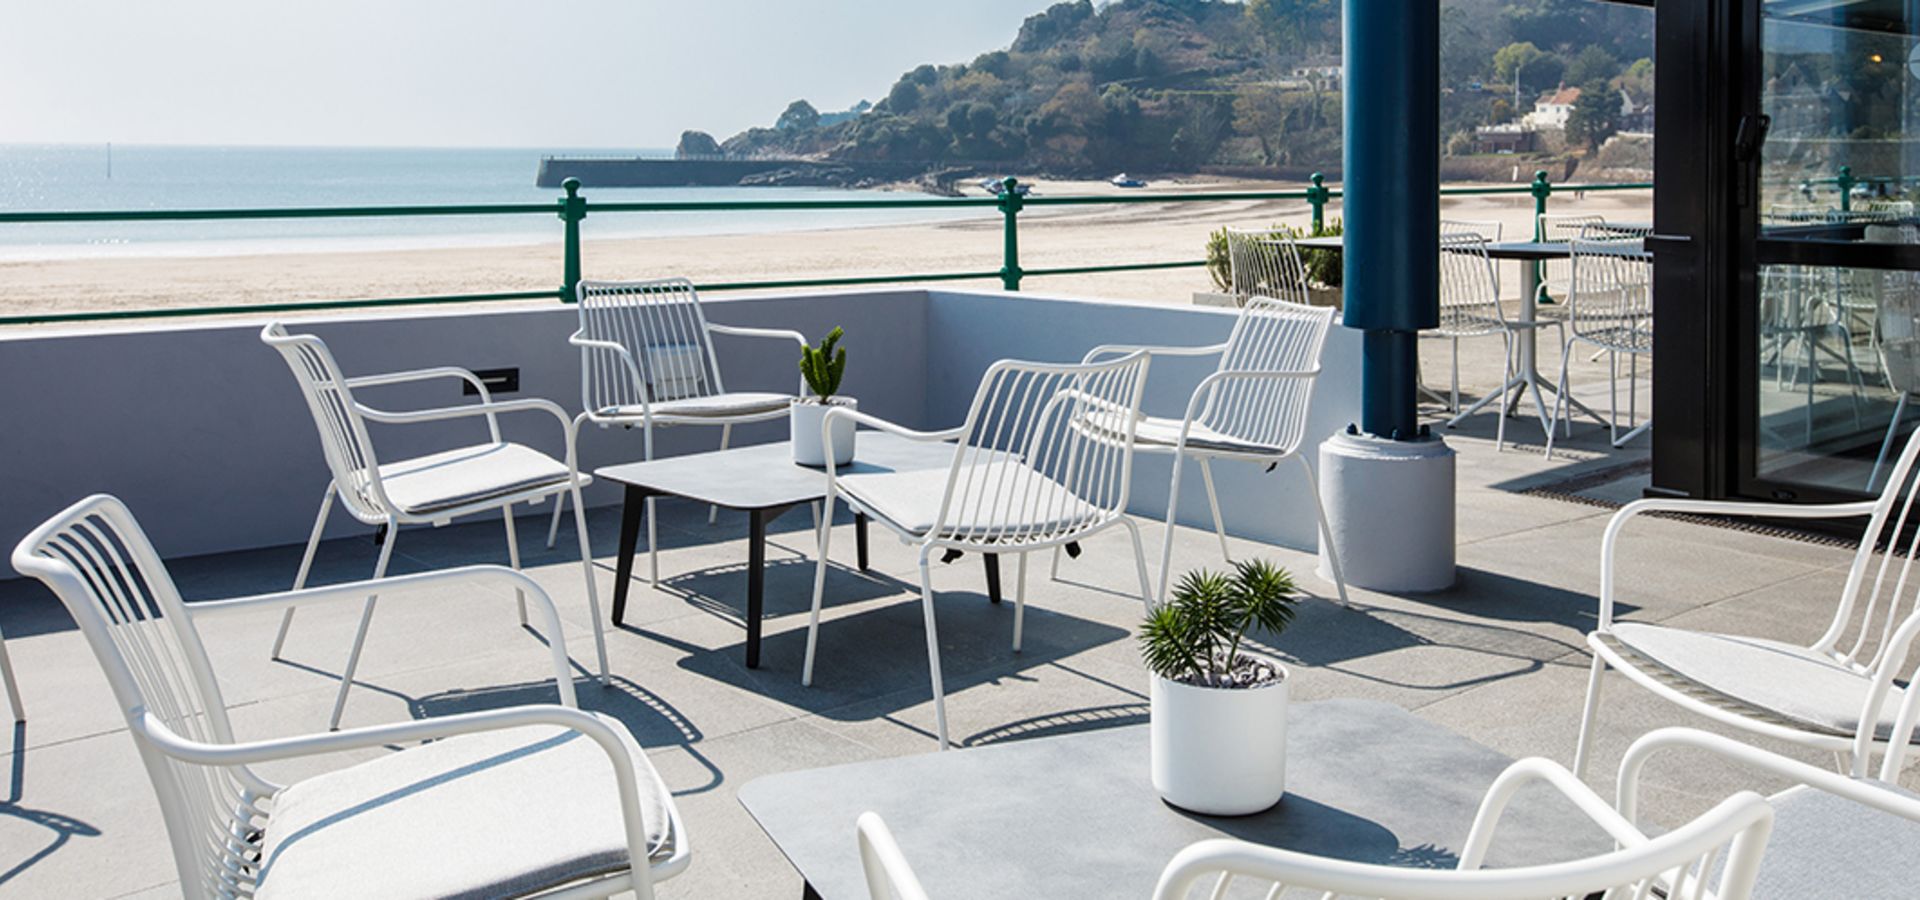 Chairs and tables overlooking the beach